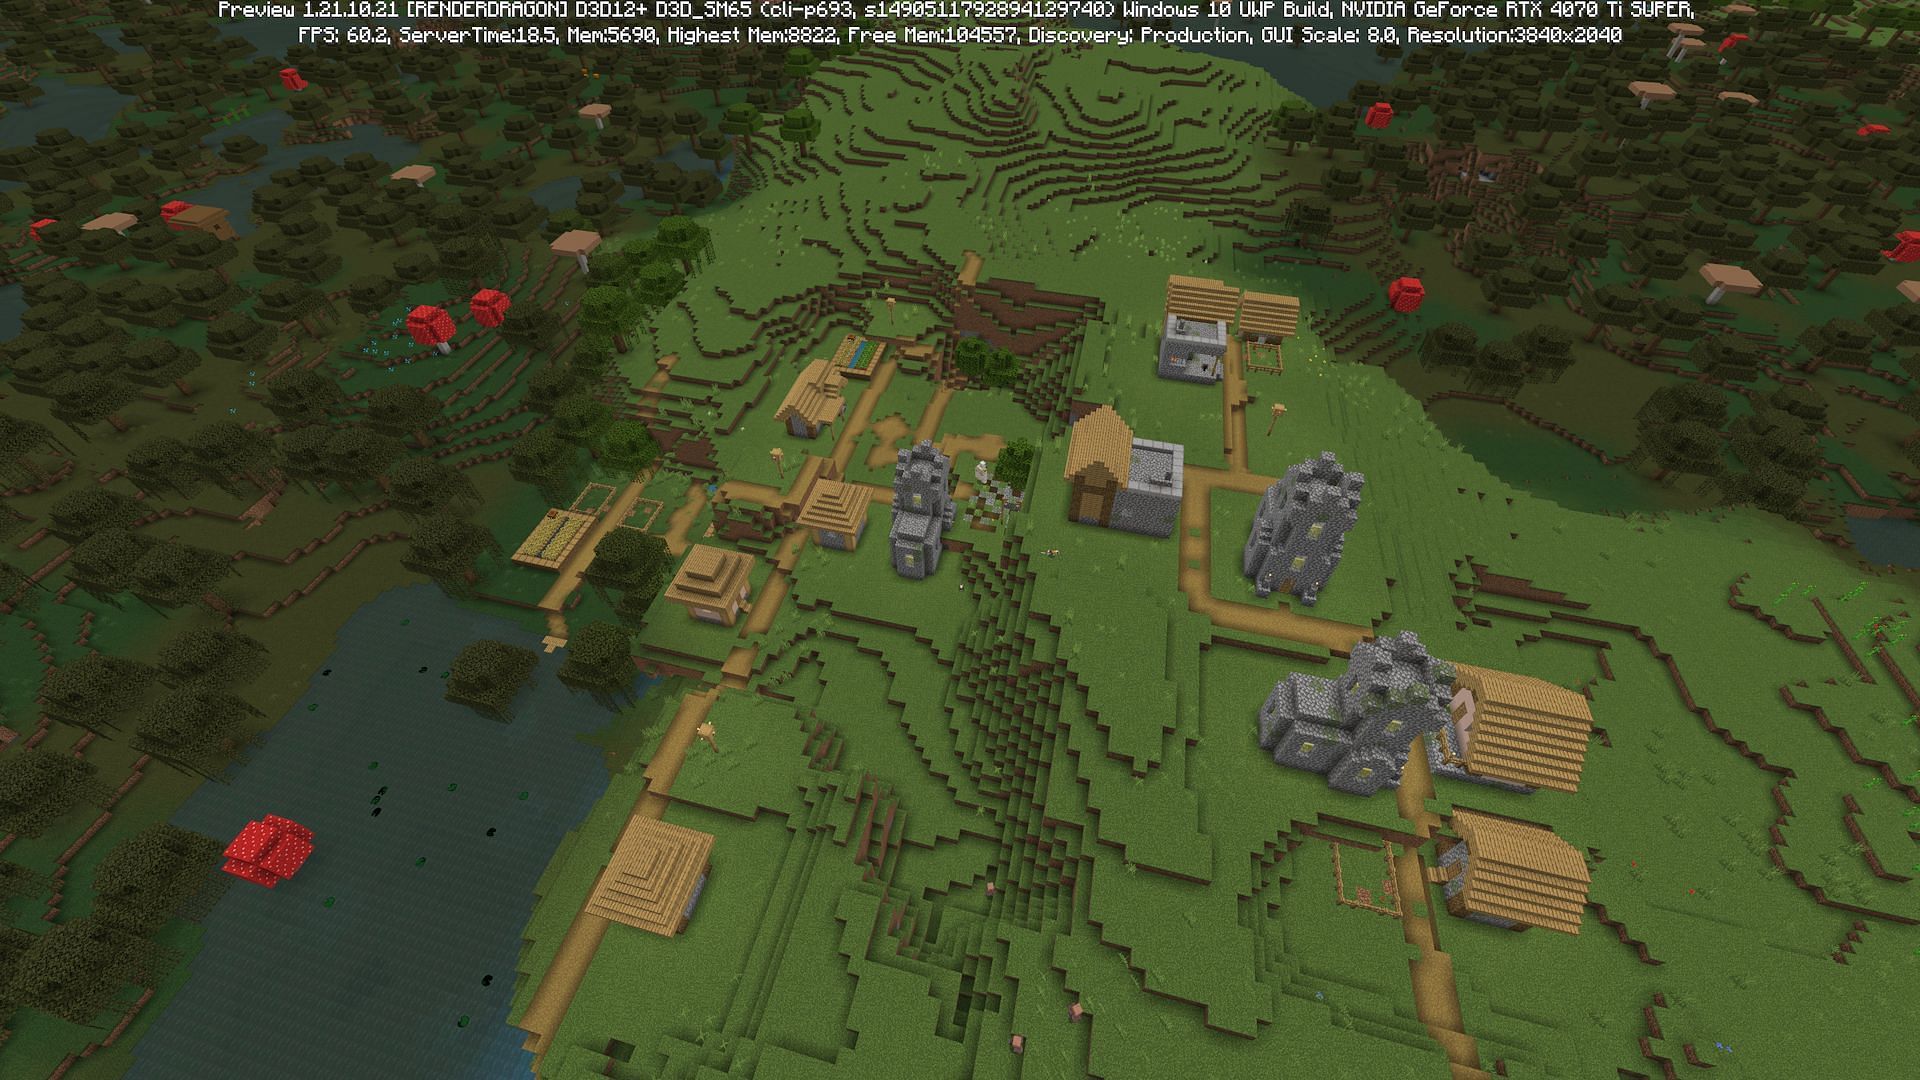 A large swamp village found on the seed (Image via Mojang)